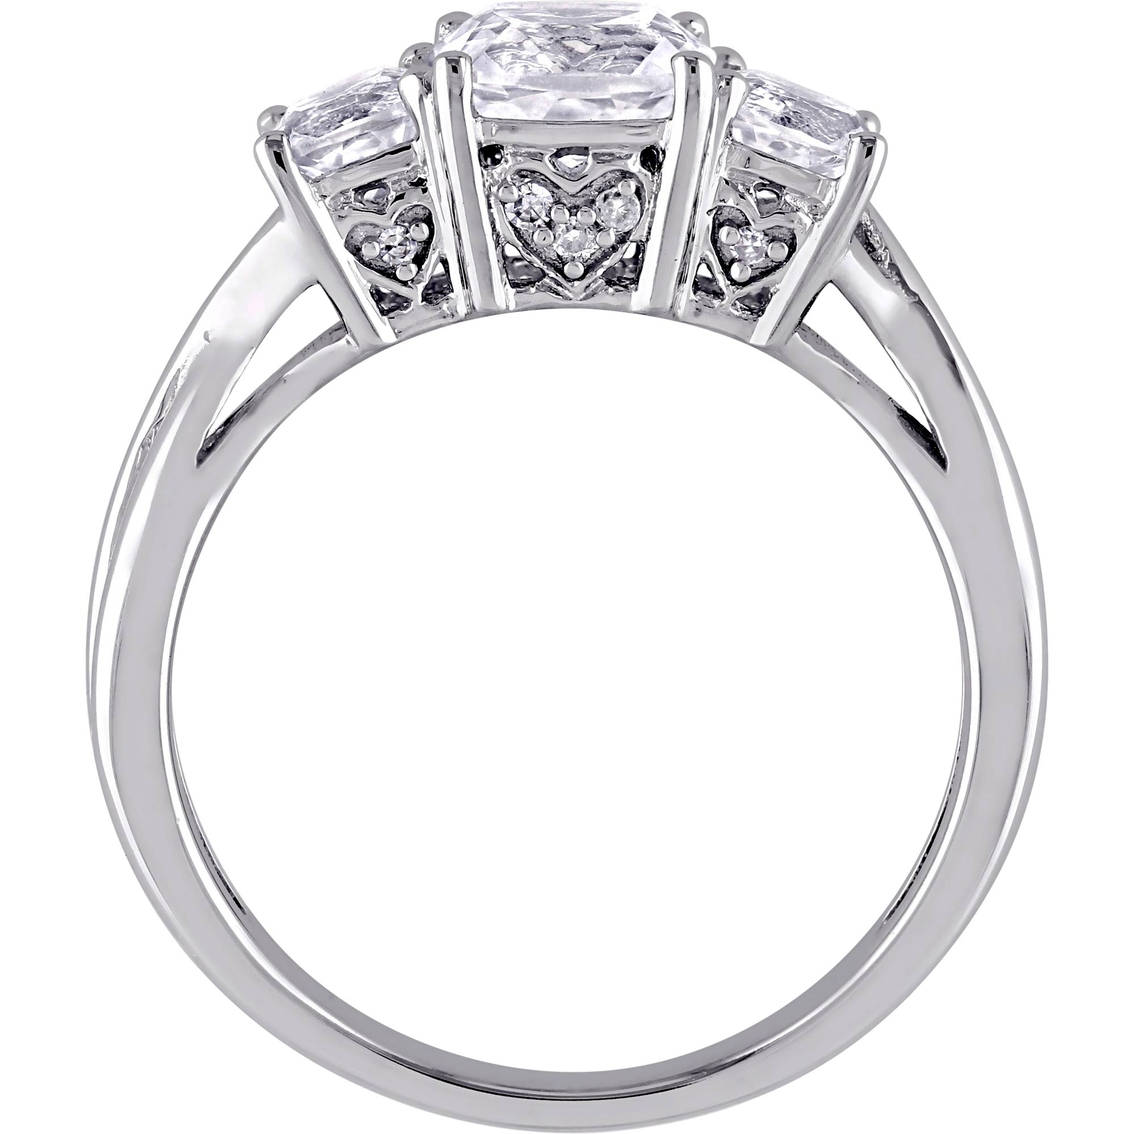 Sofia B. 10K White Gold 2 CTW Created White Sapphire and 3-Stone Engagement Ring - Image 3 of 4